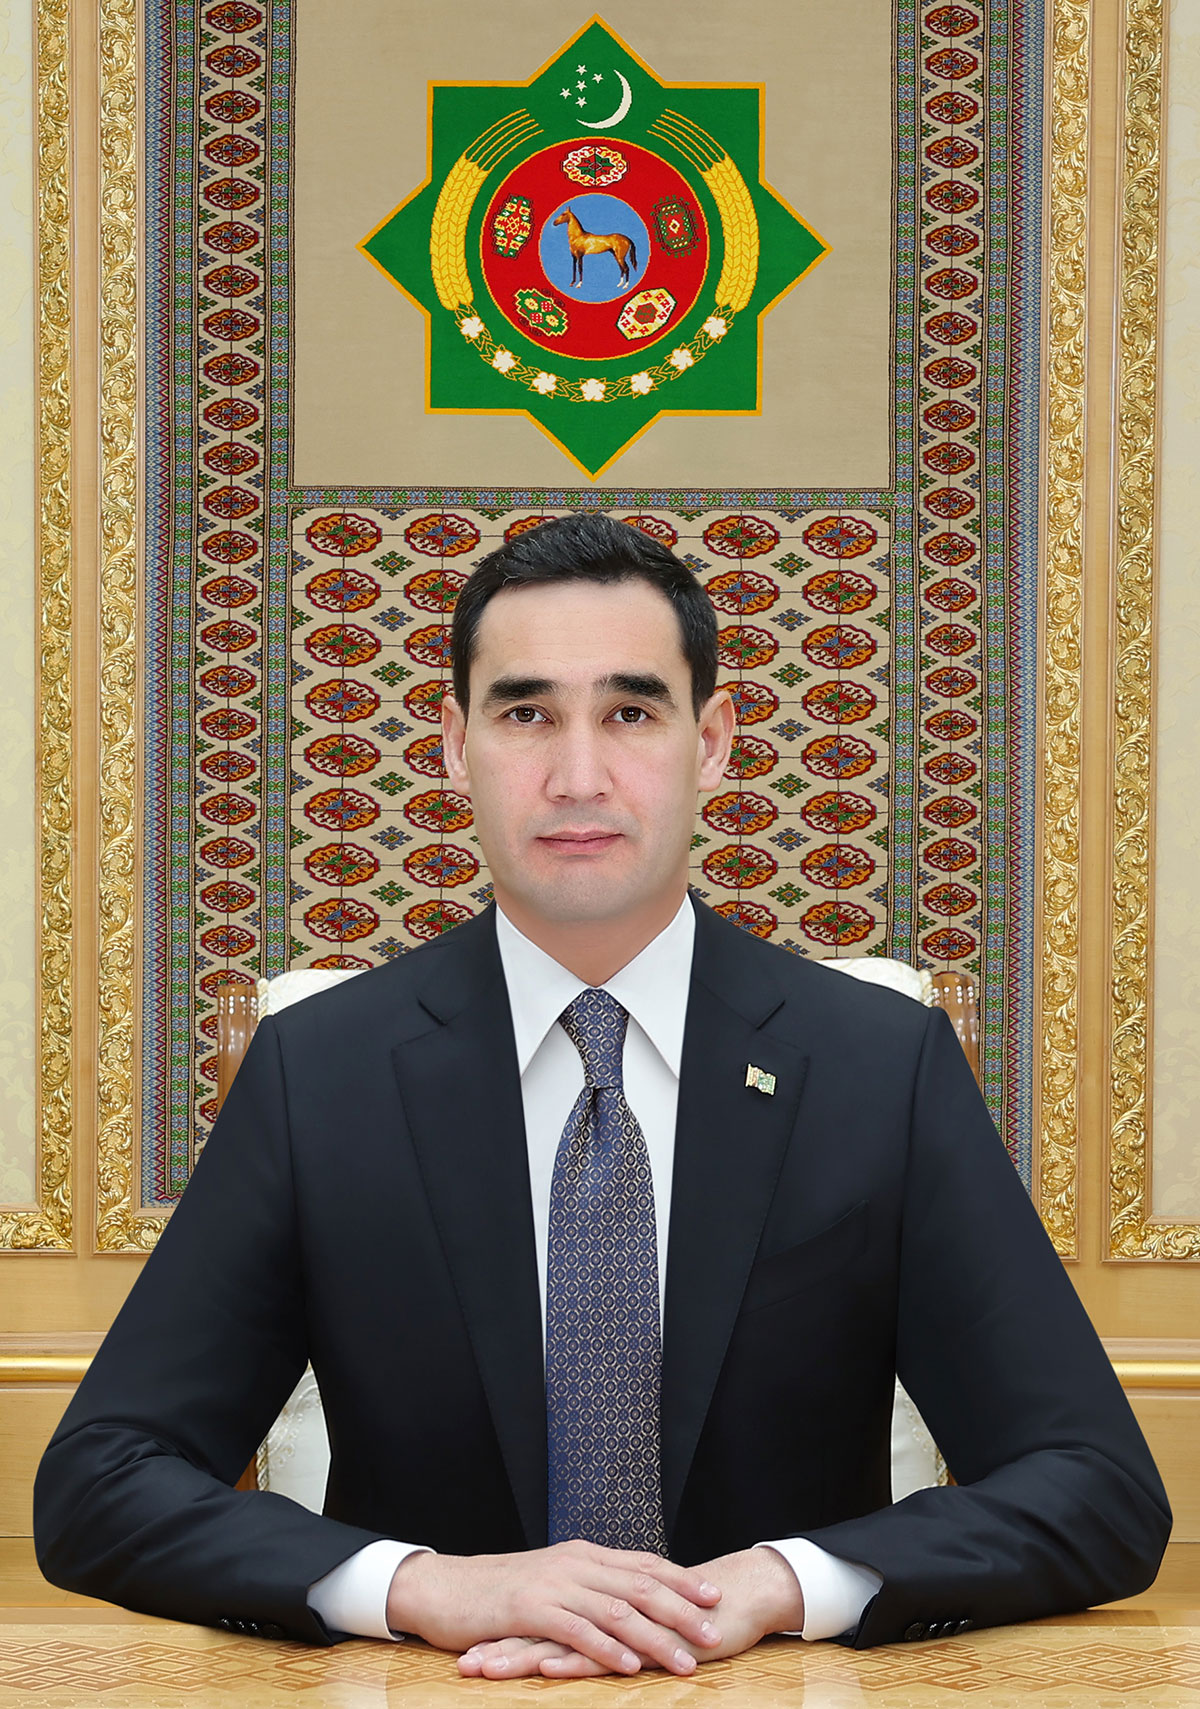 President of Turkmenistan accepted the credentials from the Indian Ambassador